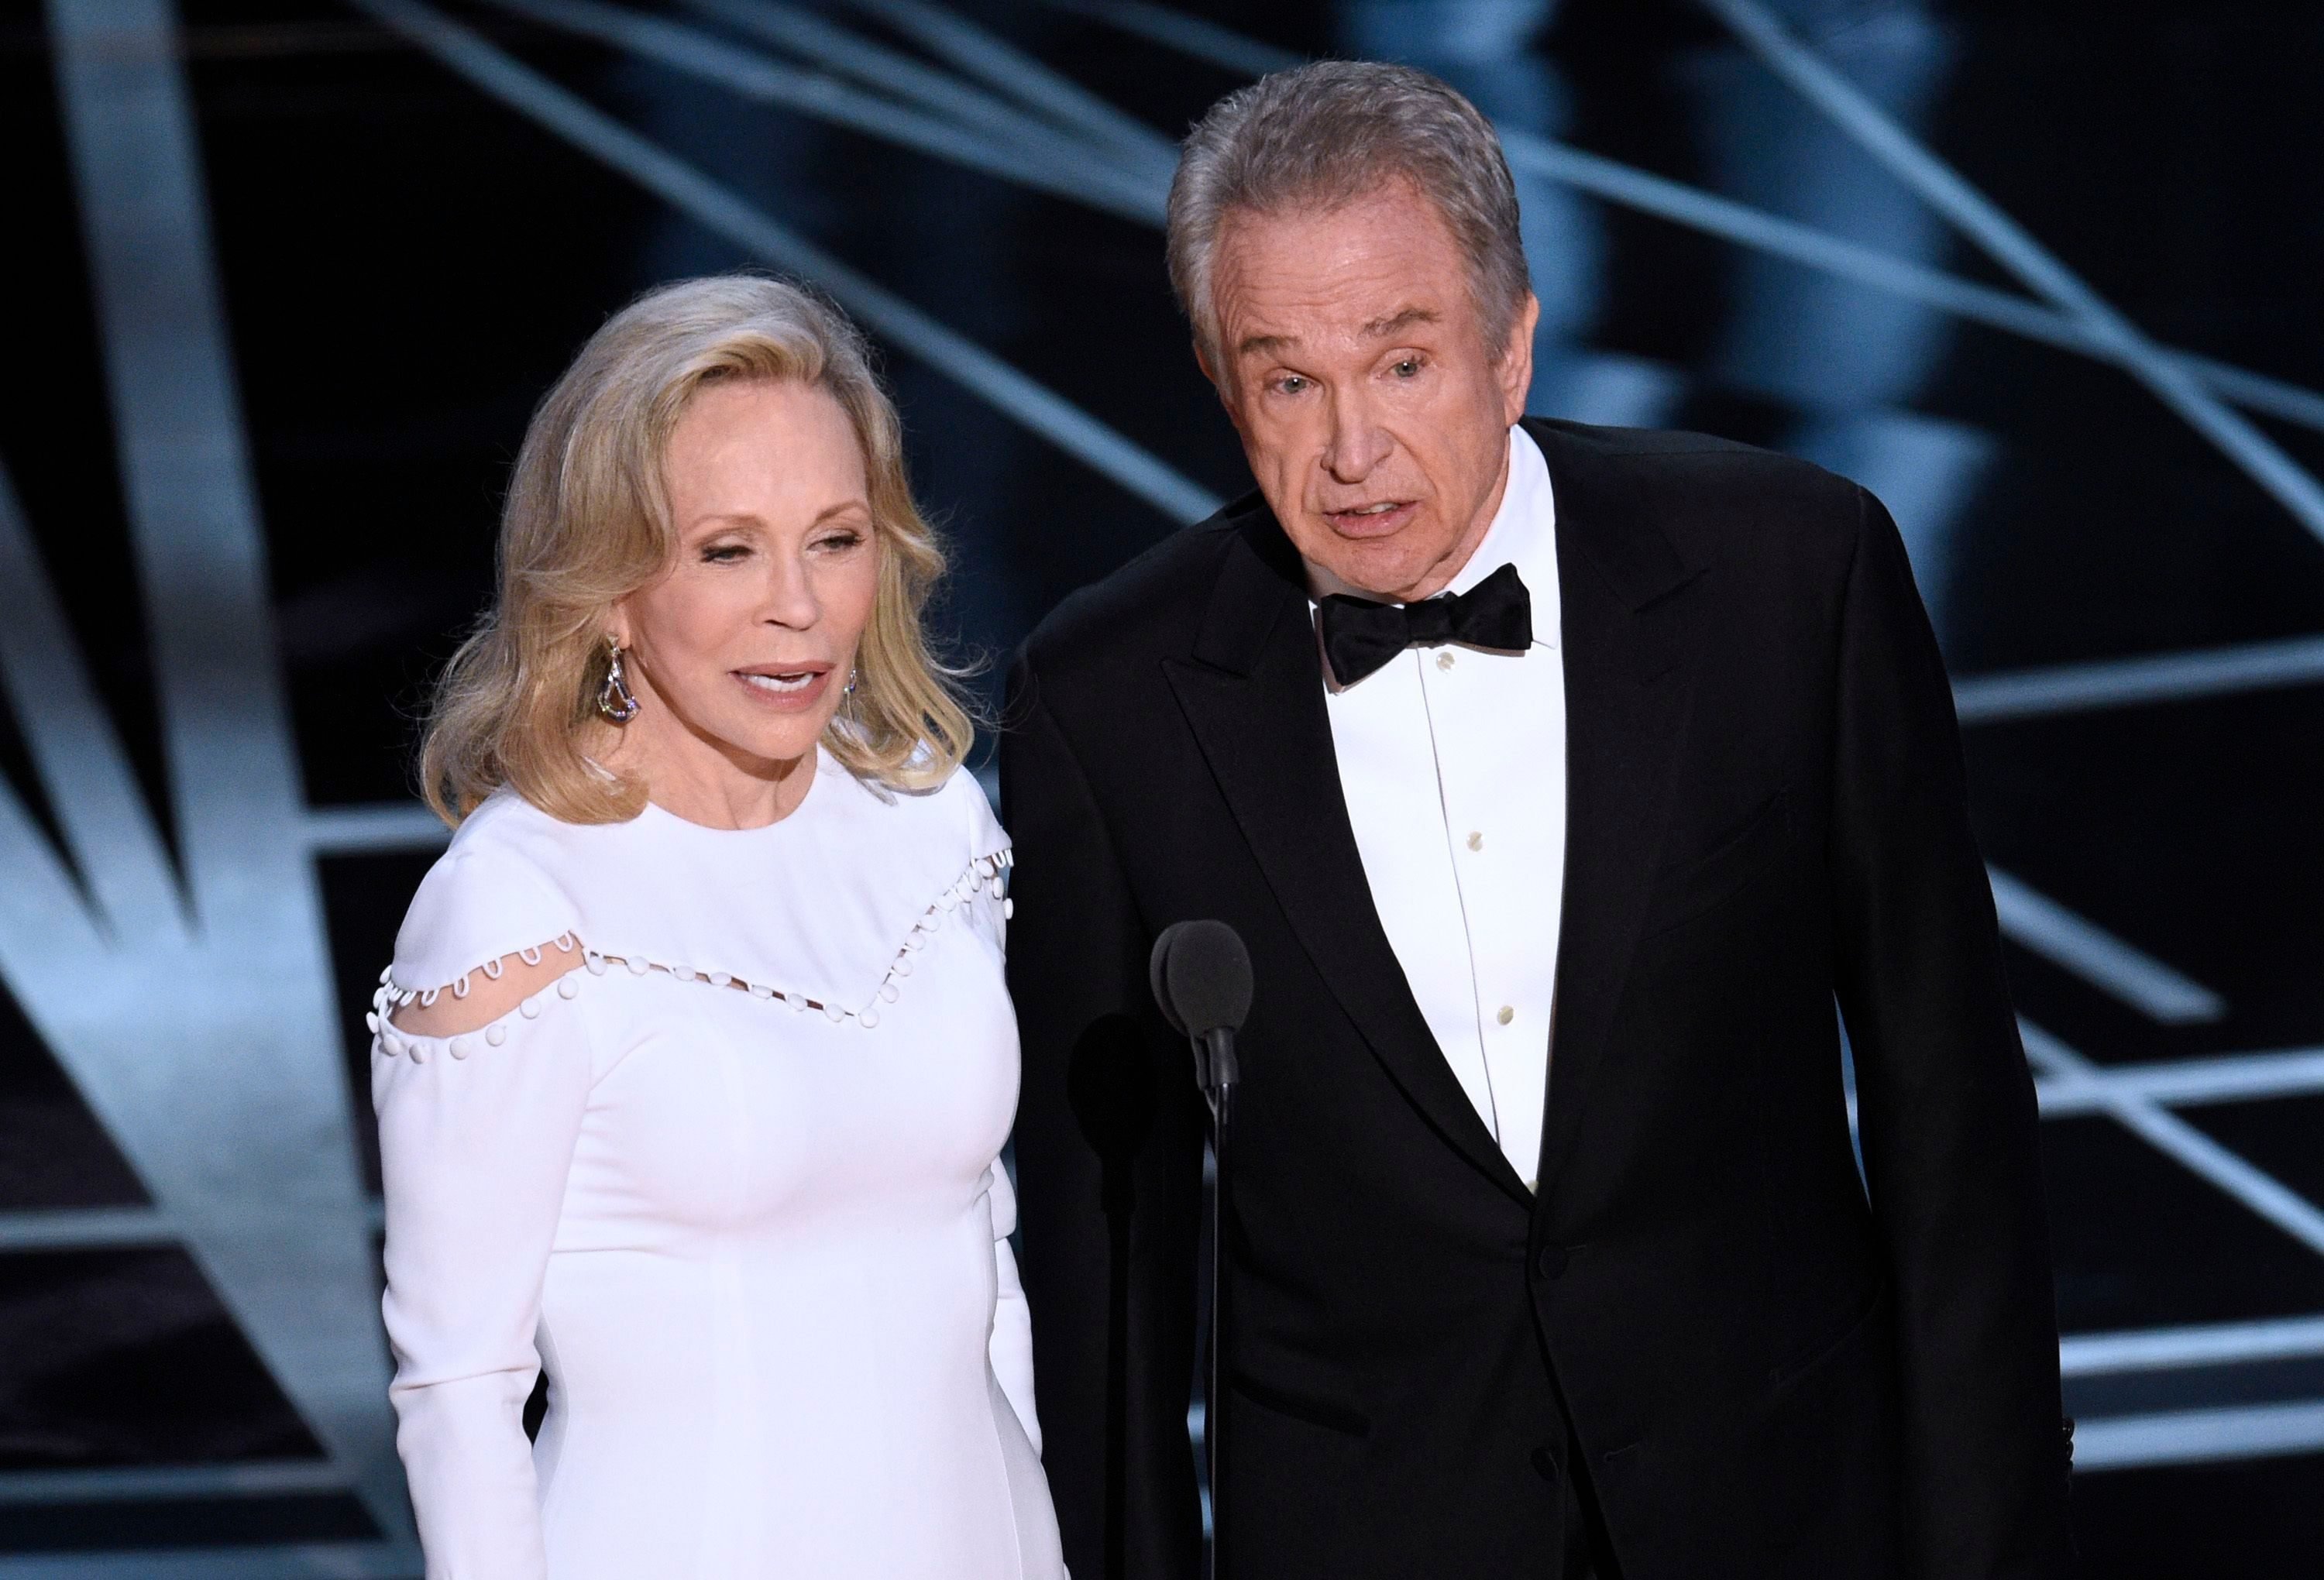 Mandatory Credit: Photo by Invision/AP/Shutterstock (9241604de) Faye Dunaway, left, and Warren Beatty present the award for best picture at the Oscars, at the Dolby Theatre in Los Angeles 89th Academy Awards - Show, Los Angeles, USA - 26 Feb 2017